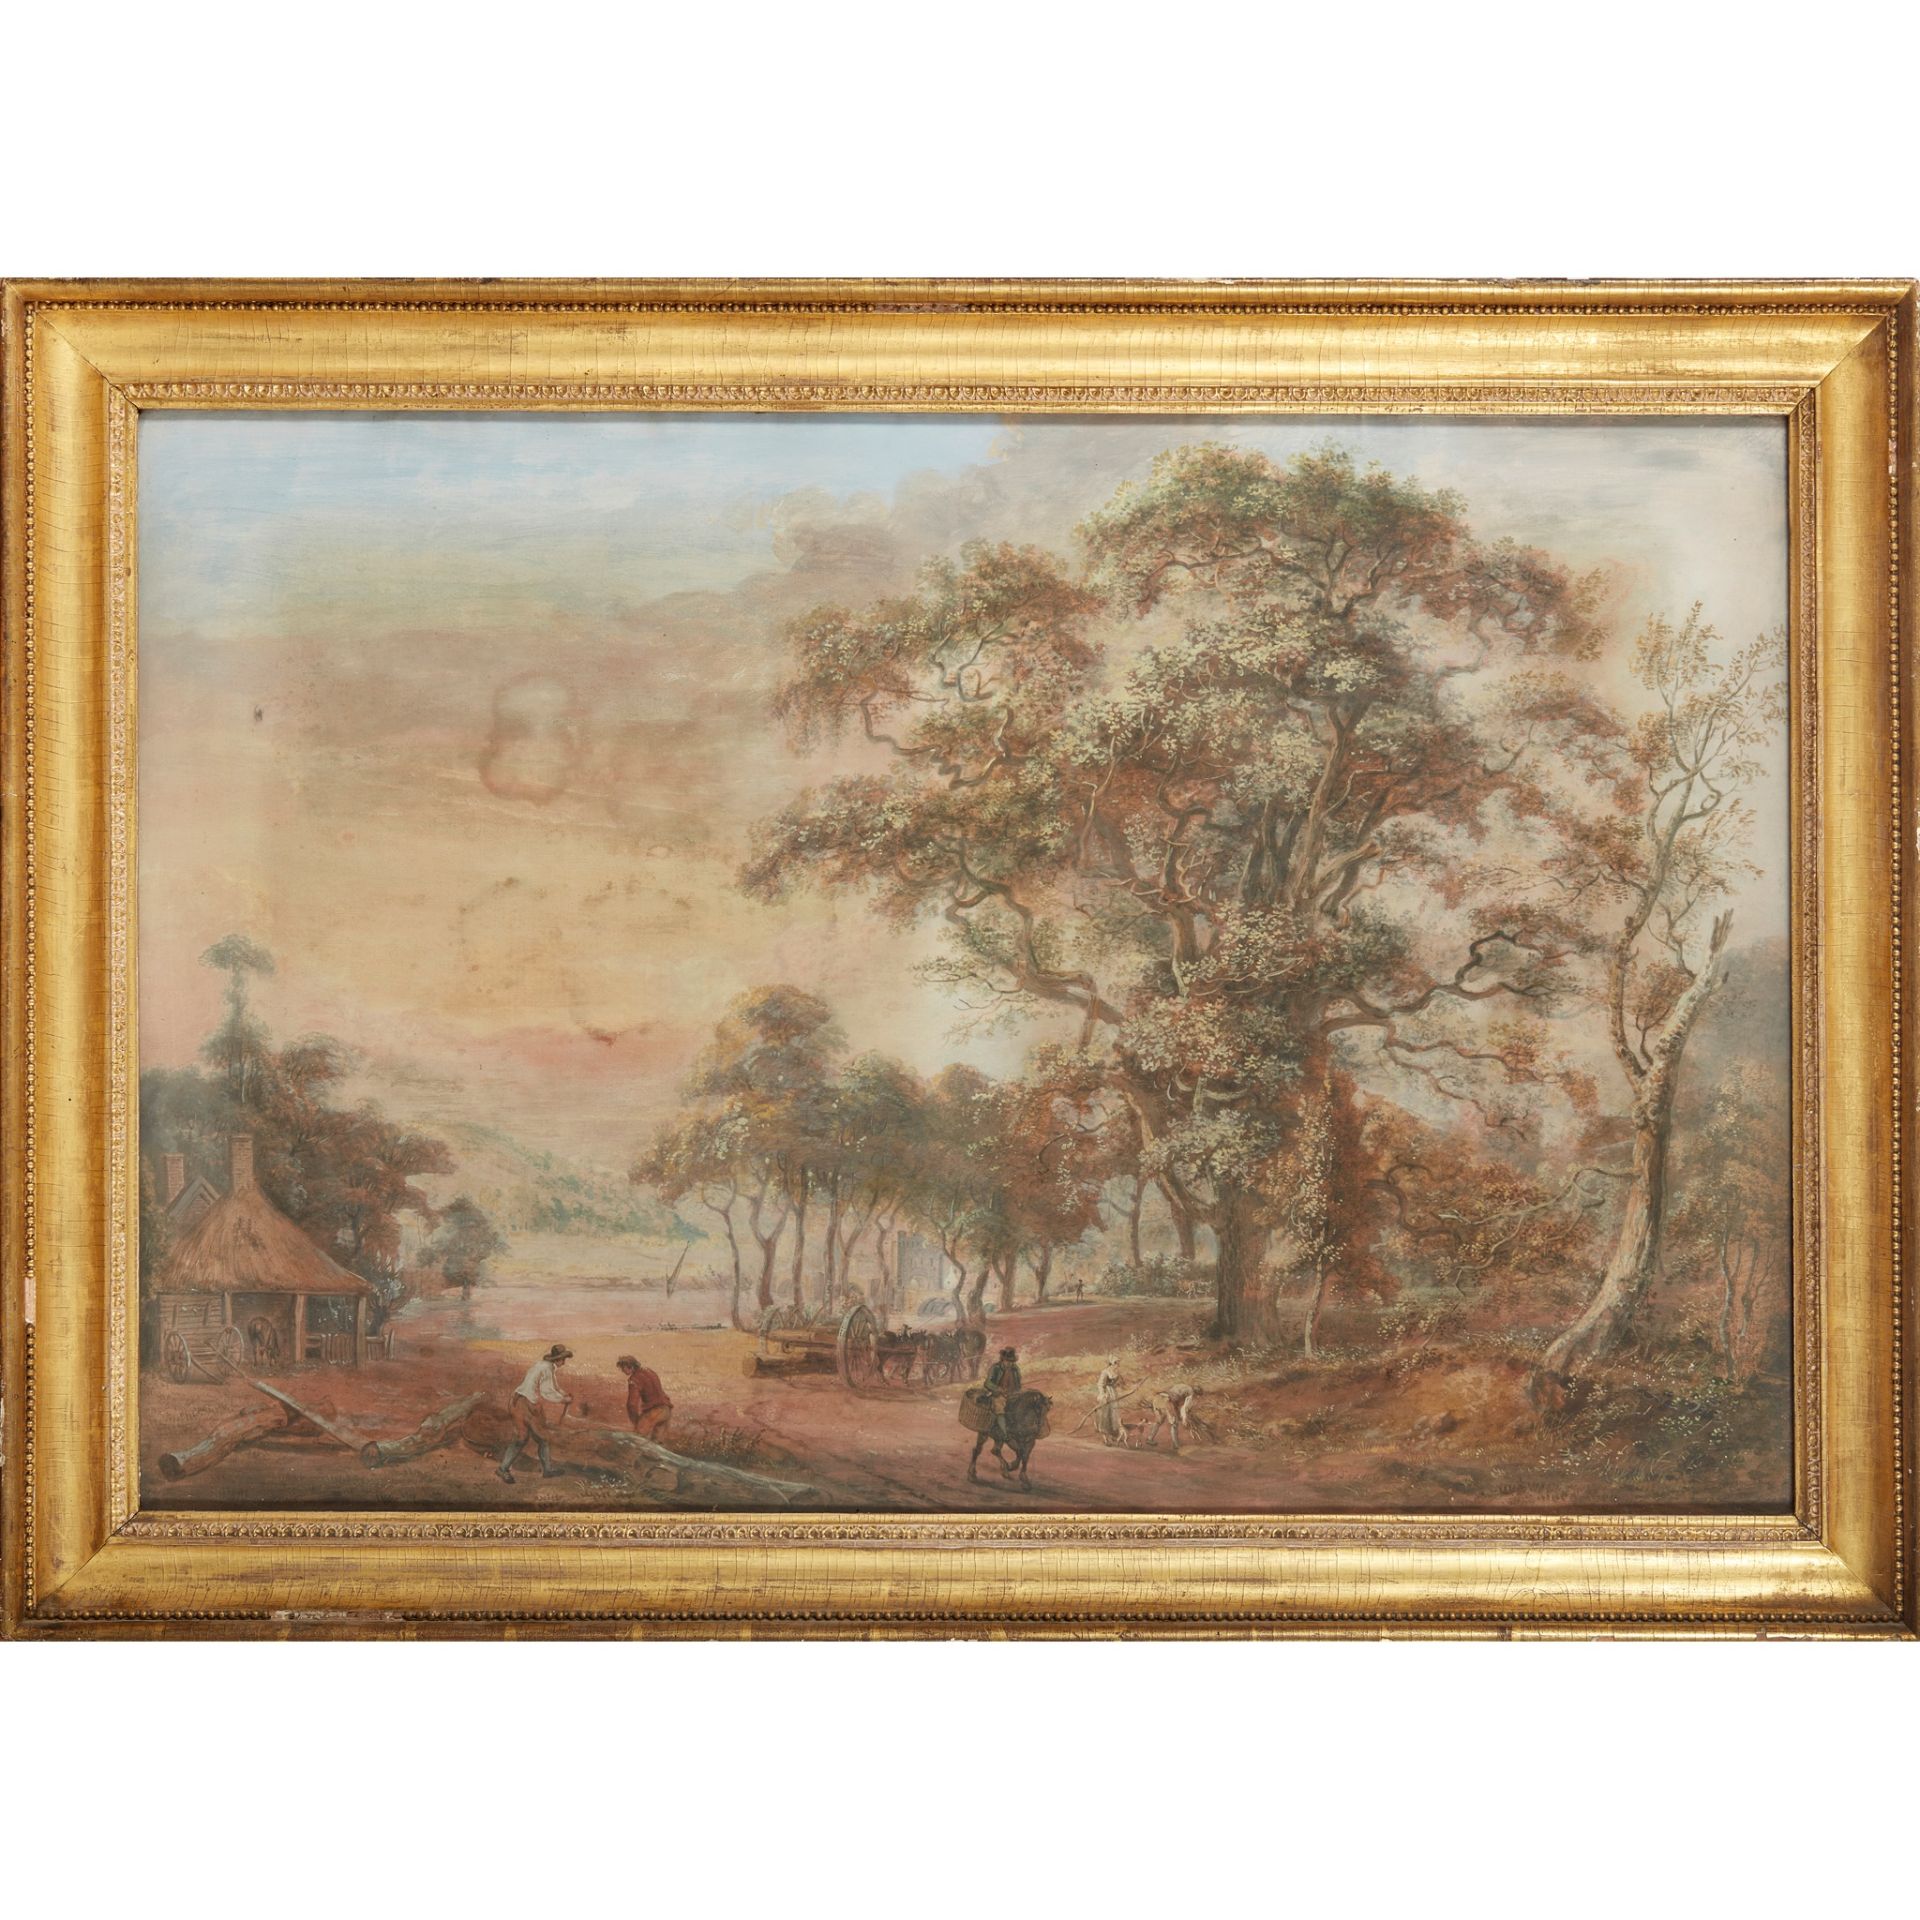 ATTRIBUTED TO PAUL SANDBY AN EXTENSIVE WOODED RIVER LANDSCAPE WITH FIGURES - Image 2 of 3